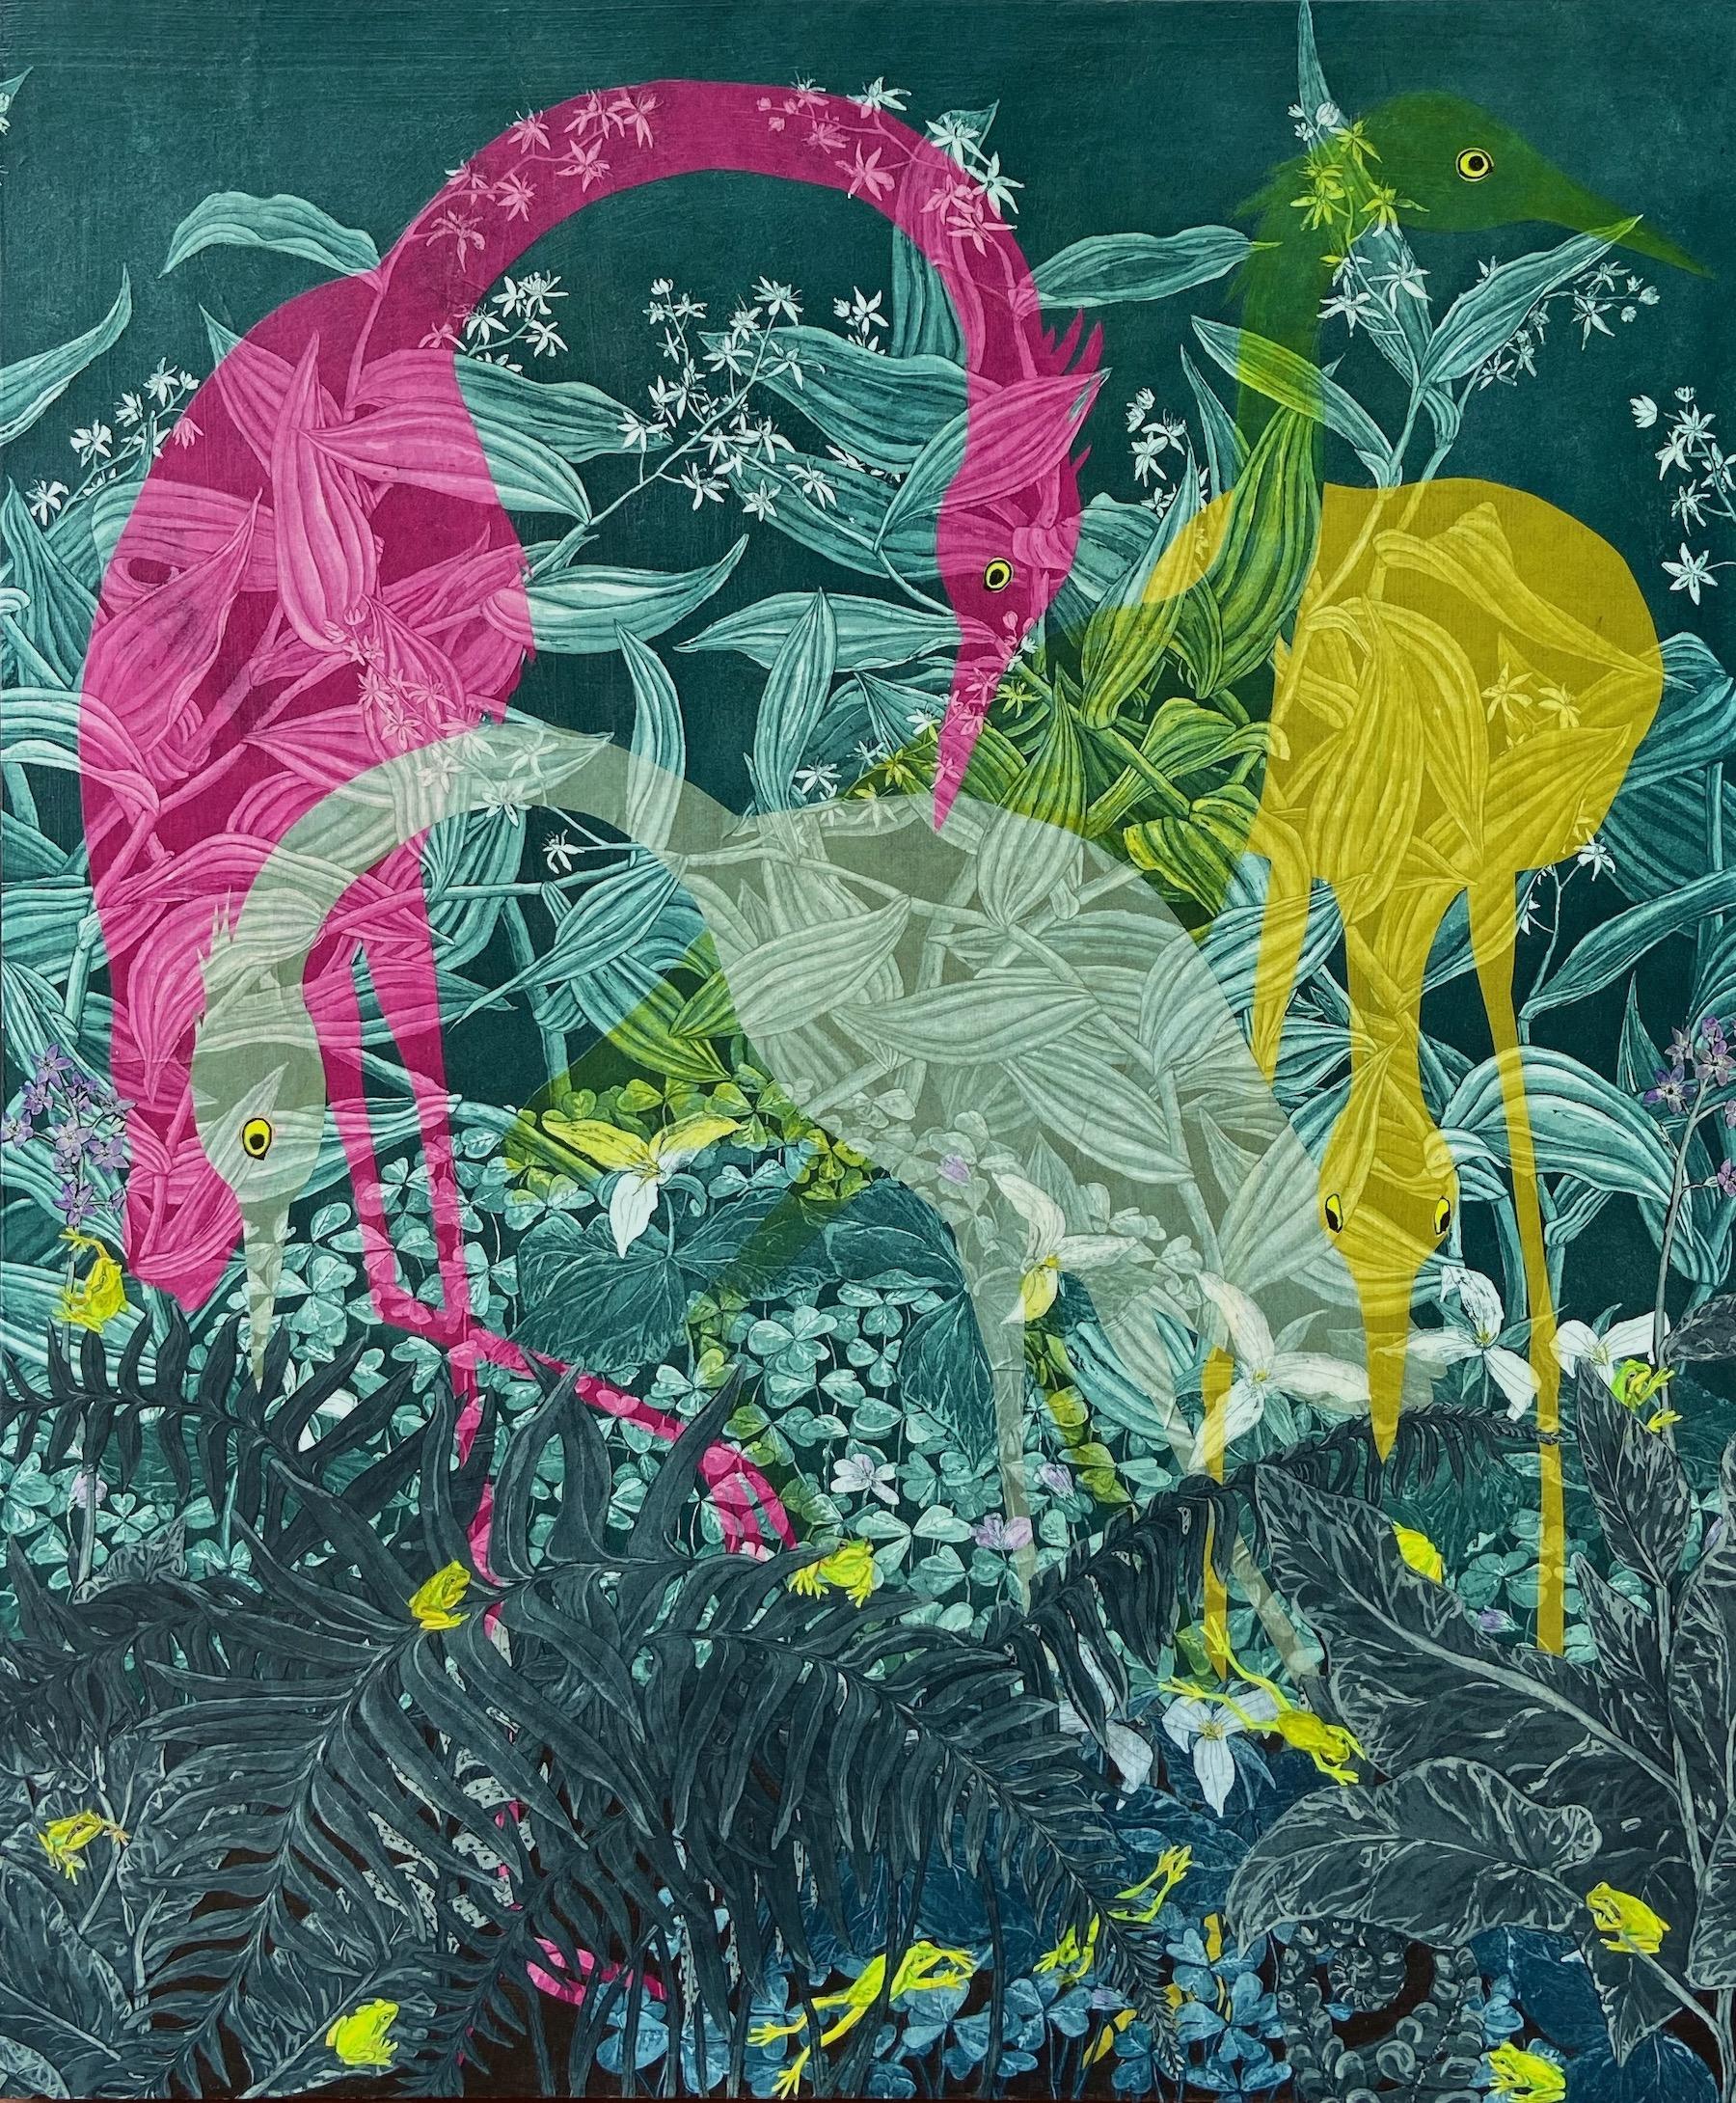 Egrets and Frogs - Mixed Media Art by Julia Lucey